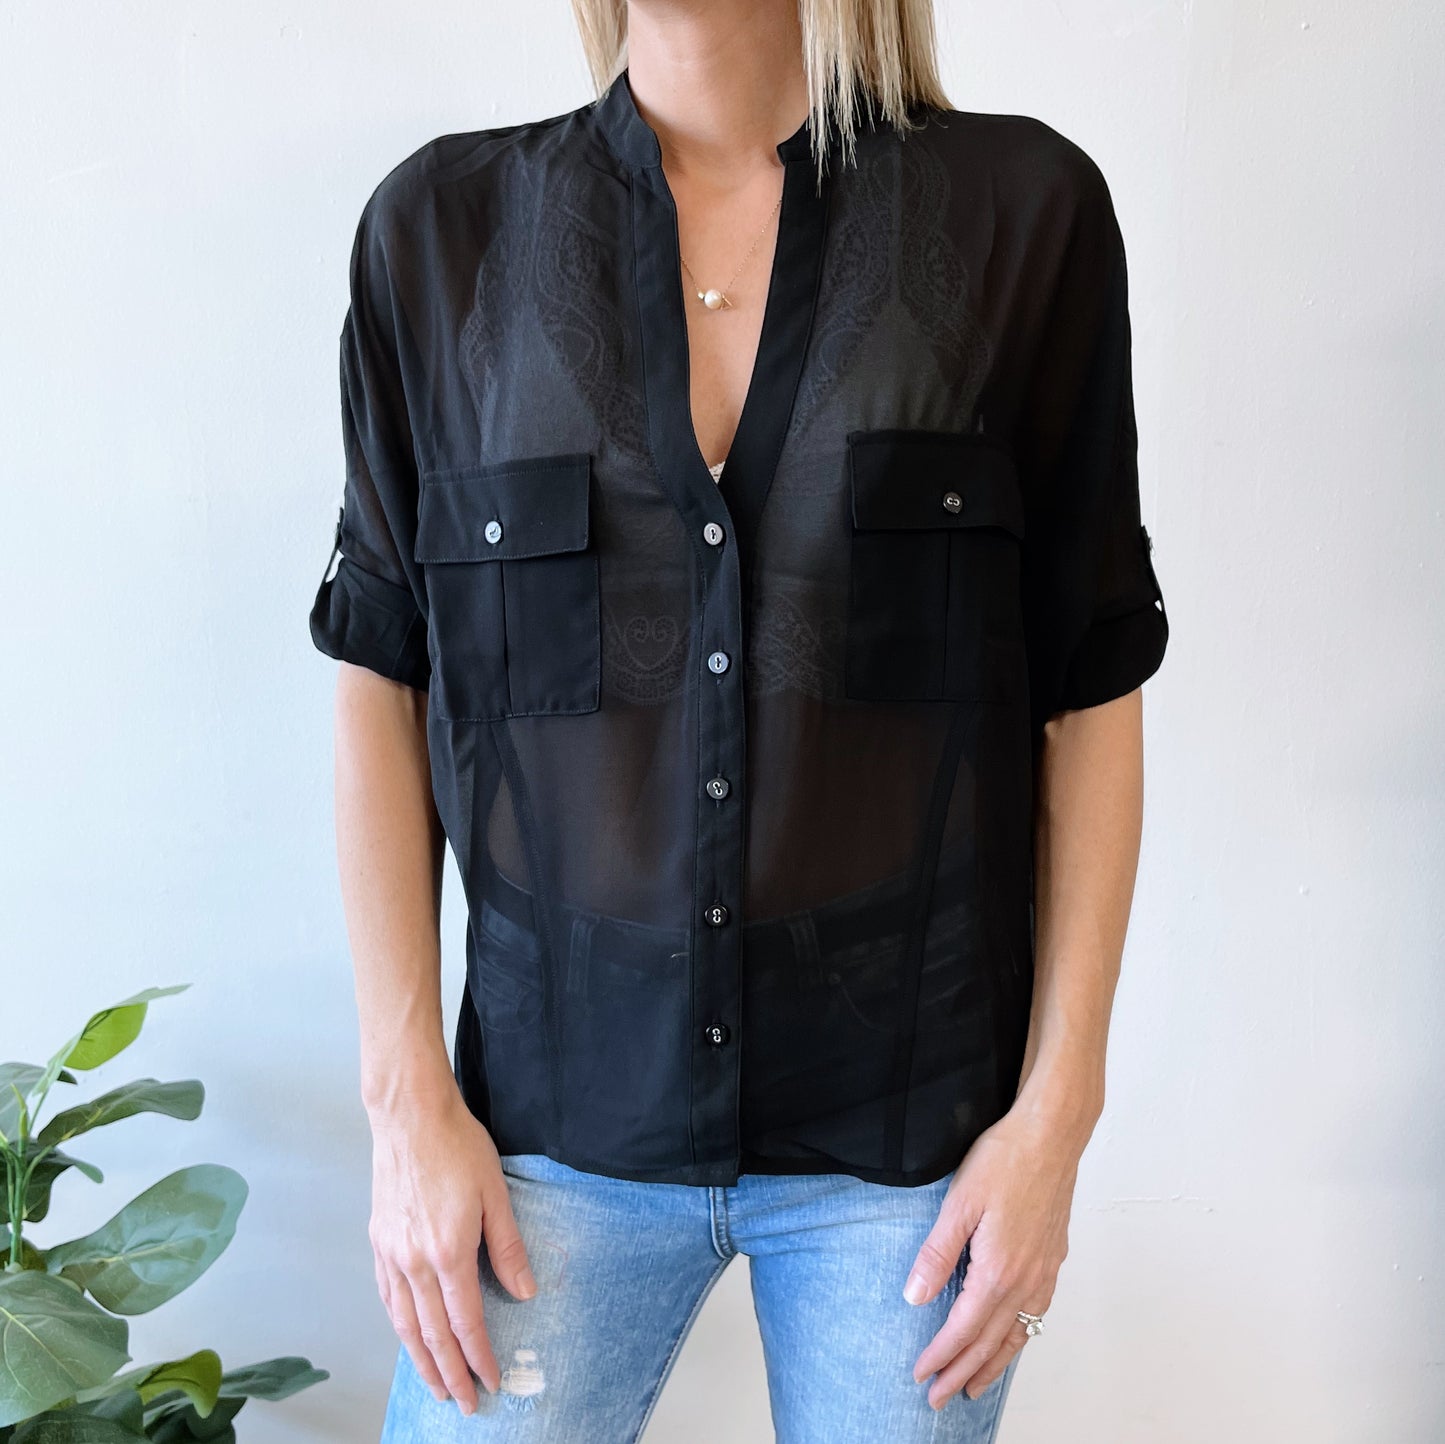 Sheer Button Down • More Colors!